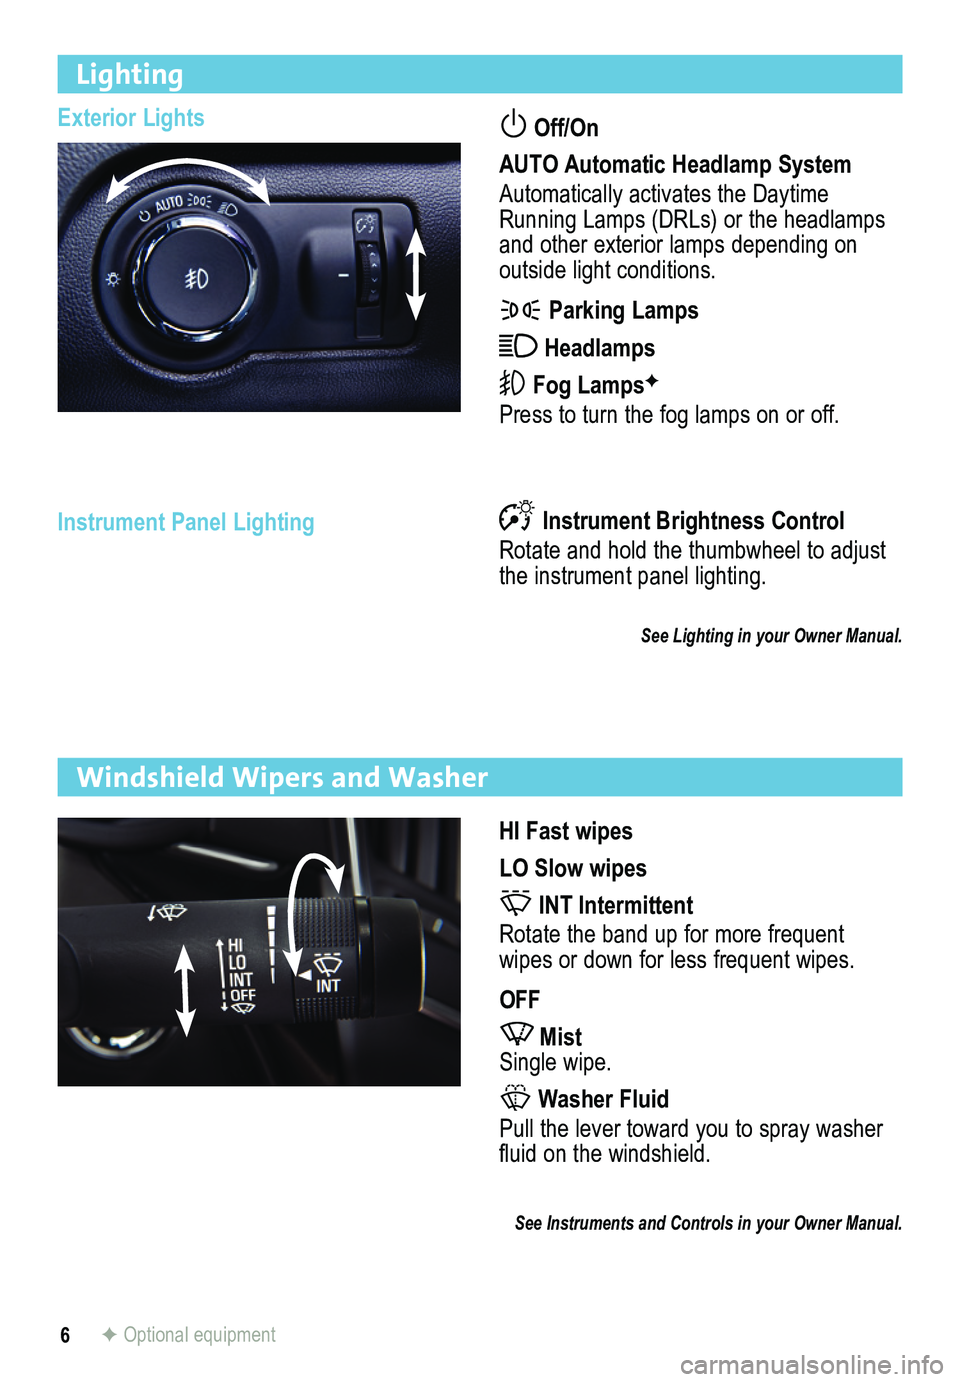 BUICK REGAL 2014  Get To Know Guide 6
Lighting
Exterior Lights Off/On  
AUTO Automatic Headlamp System
Automatically activates the Daytime Running Lamps (DRLs) or the headlamps and other exterior lamps depending on  
outside light condi